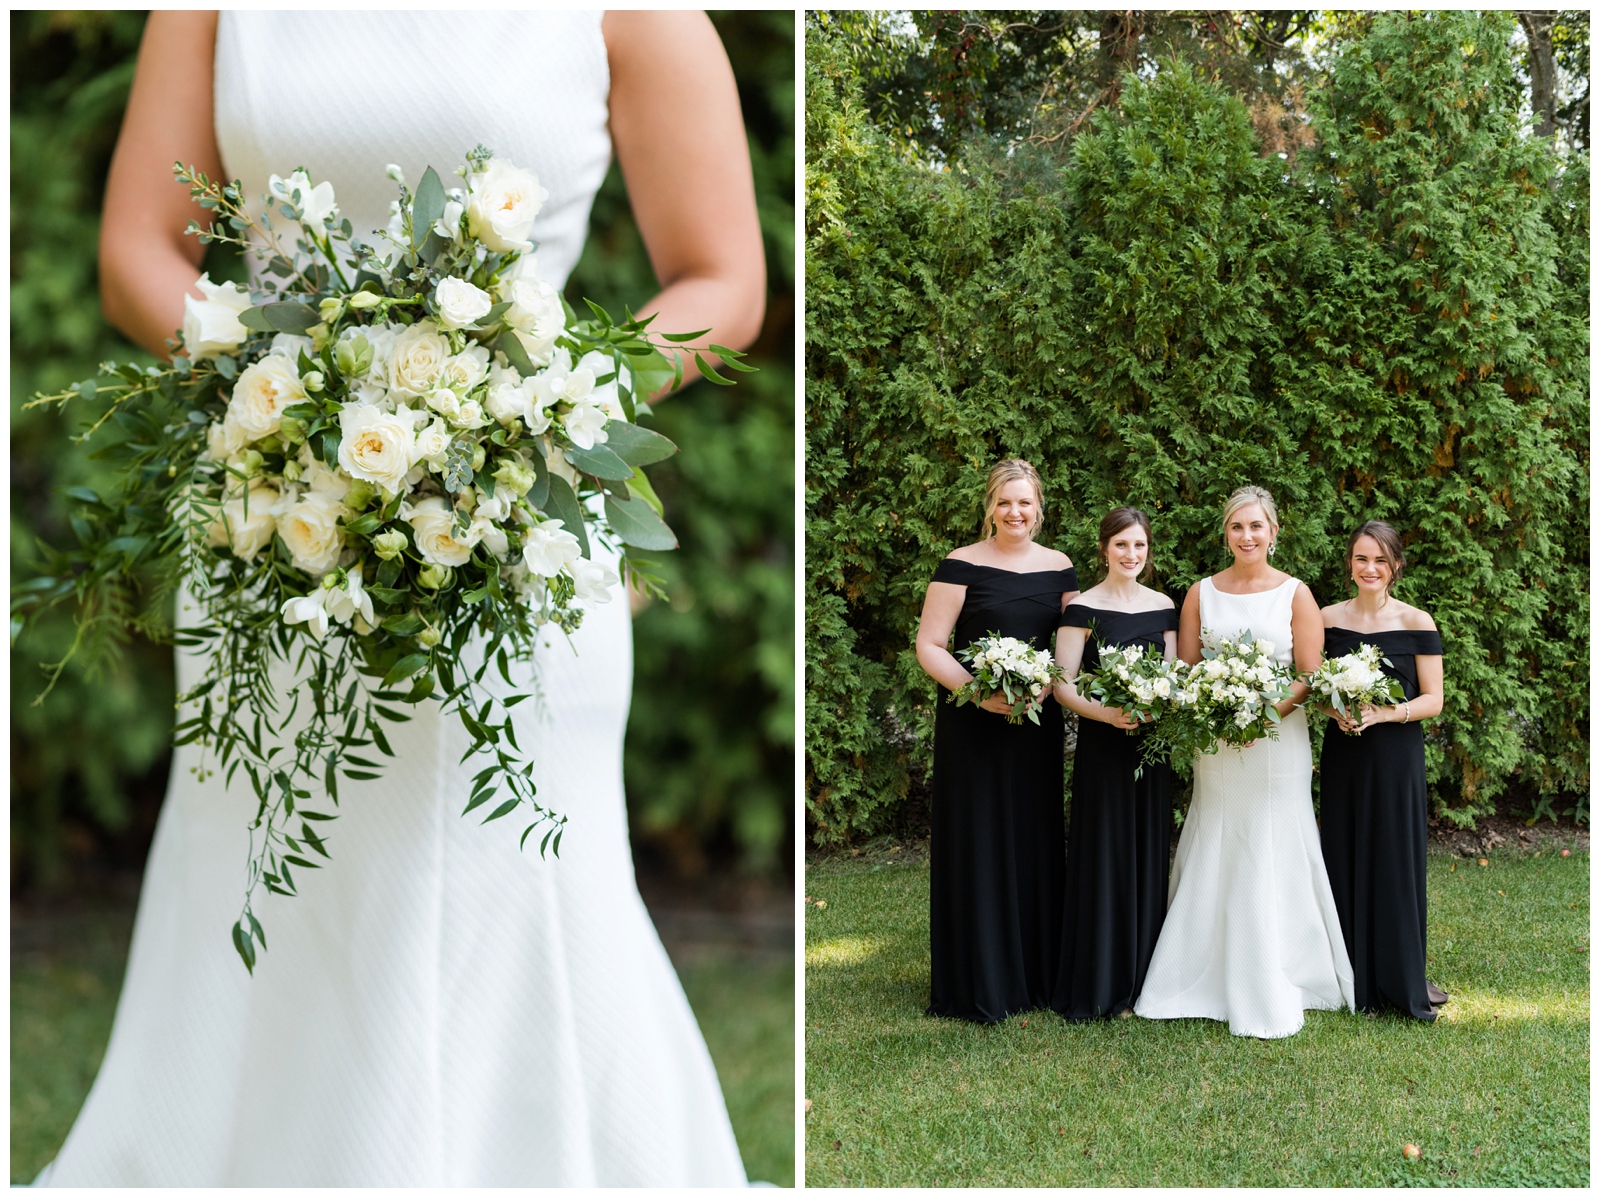 All-white wedding bouquet for the bride by The English Garden with greenery accents